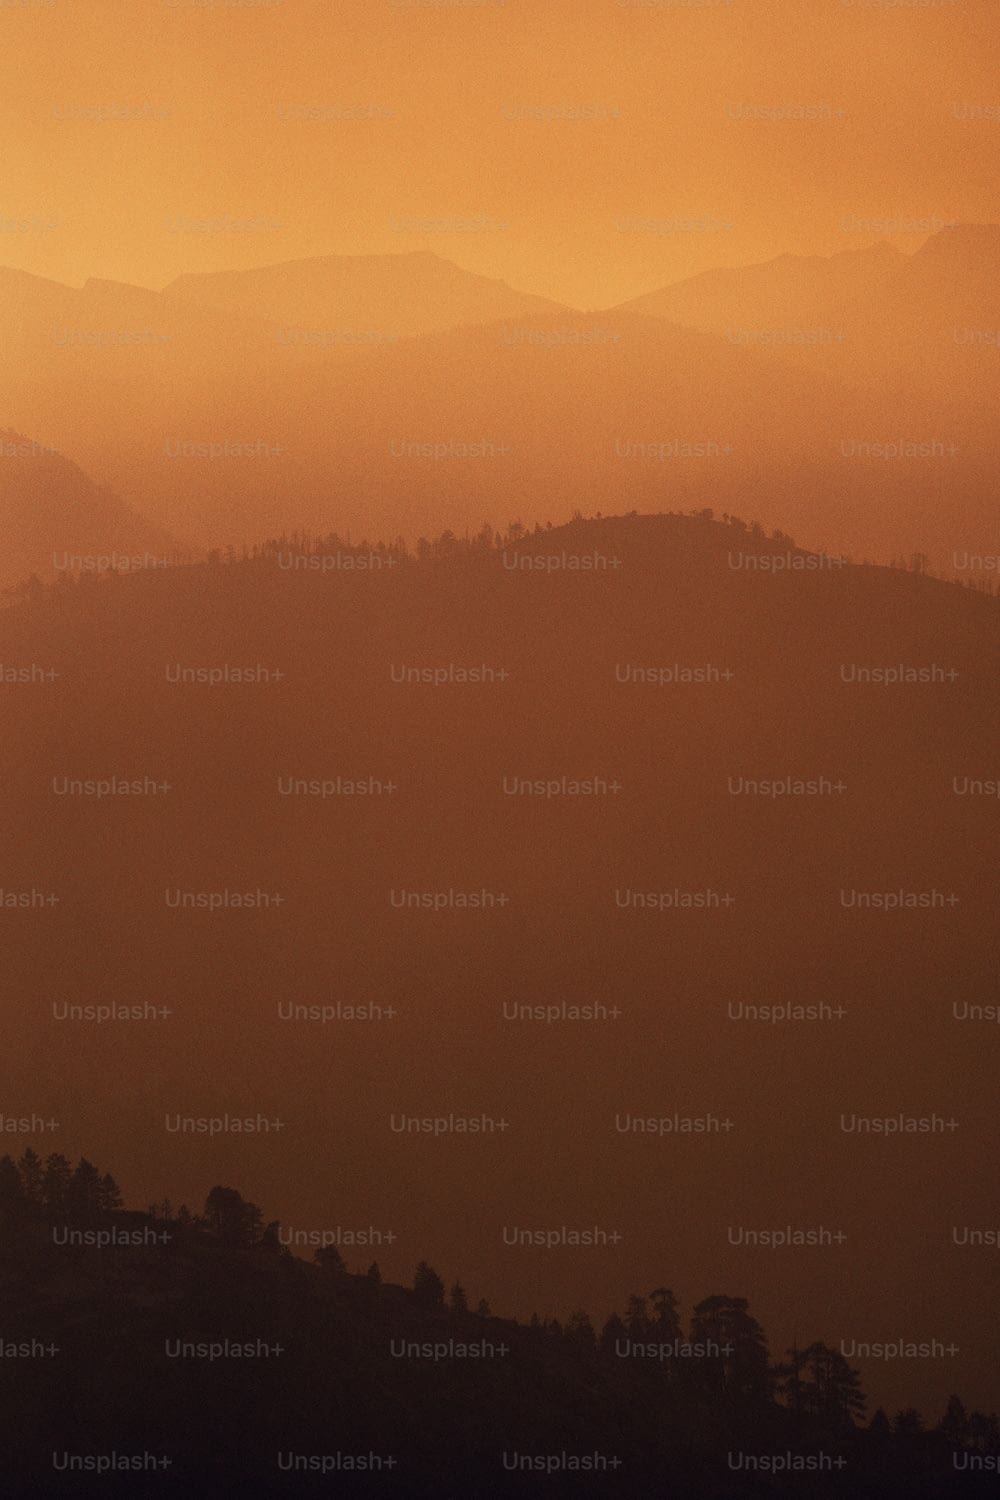 a hazy view of a mountain range with trees